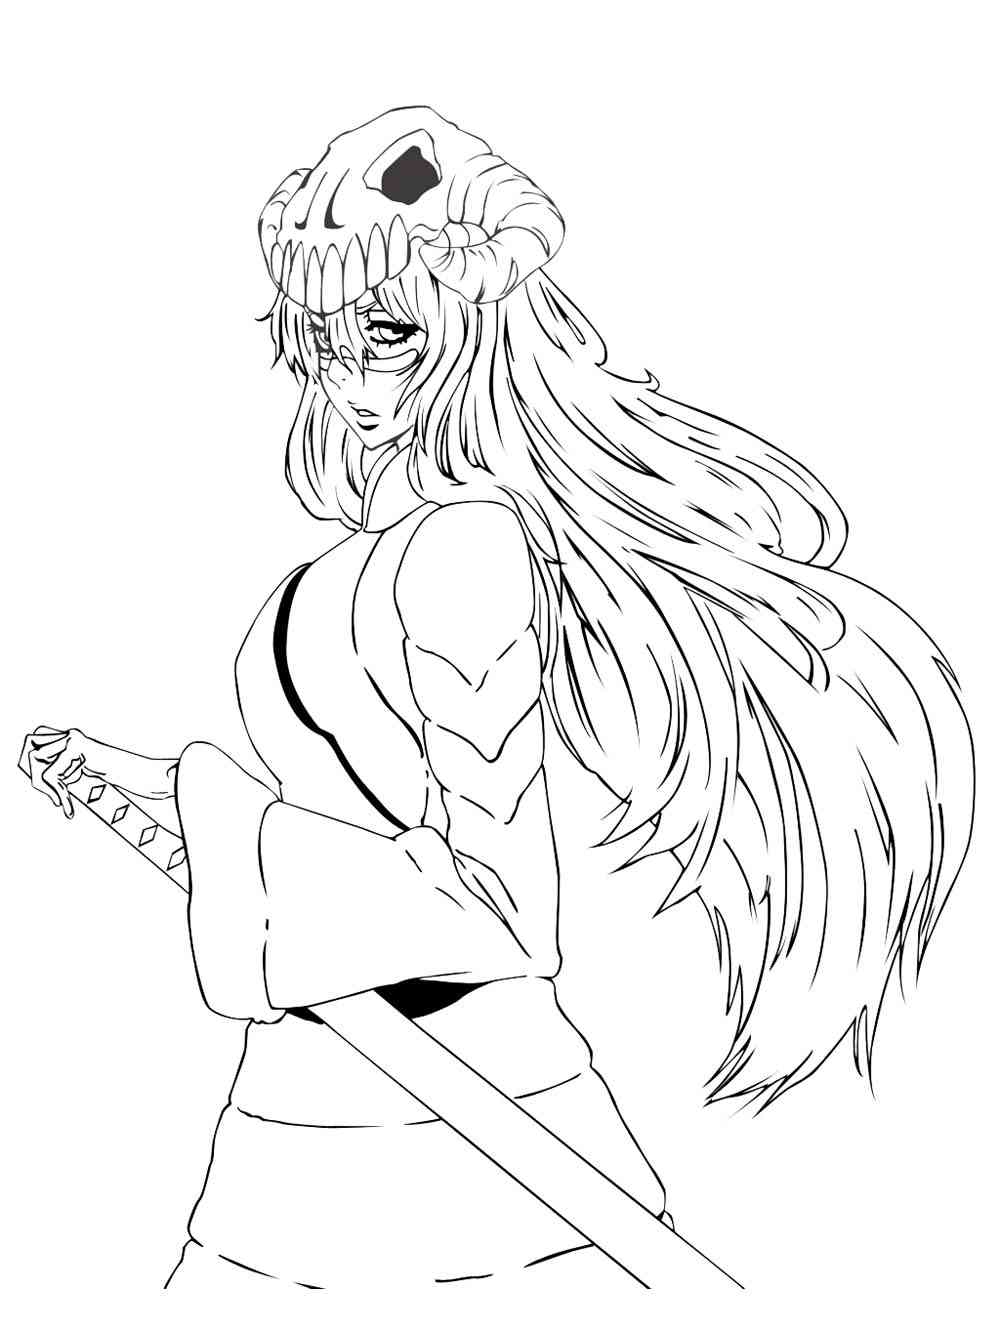 Nelliel from Bleach coloring page